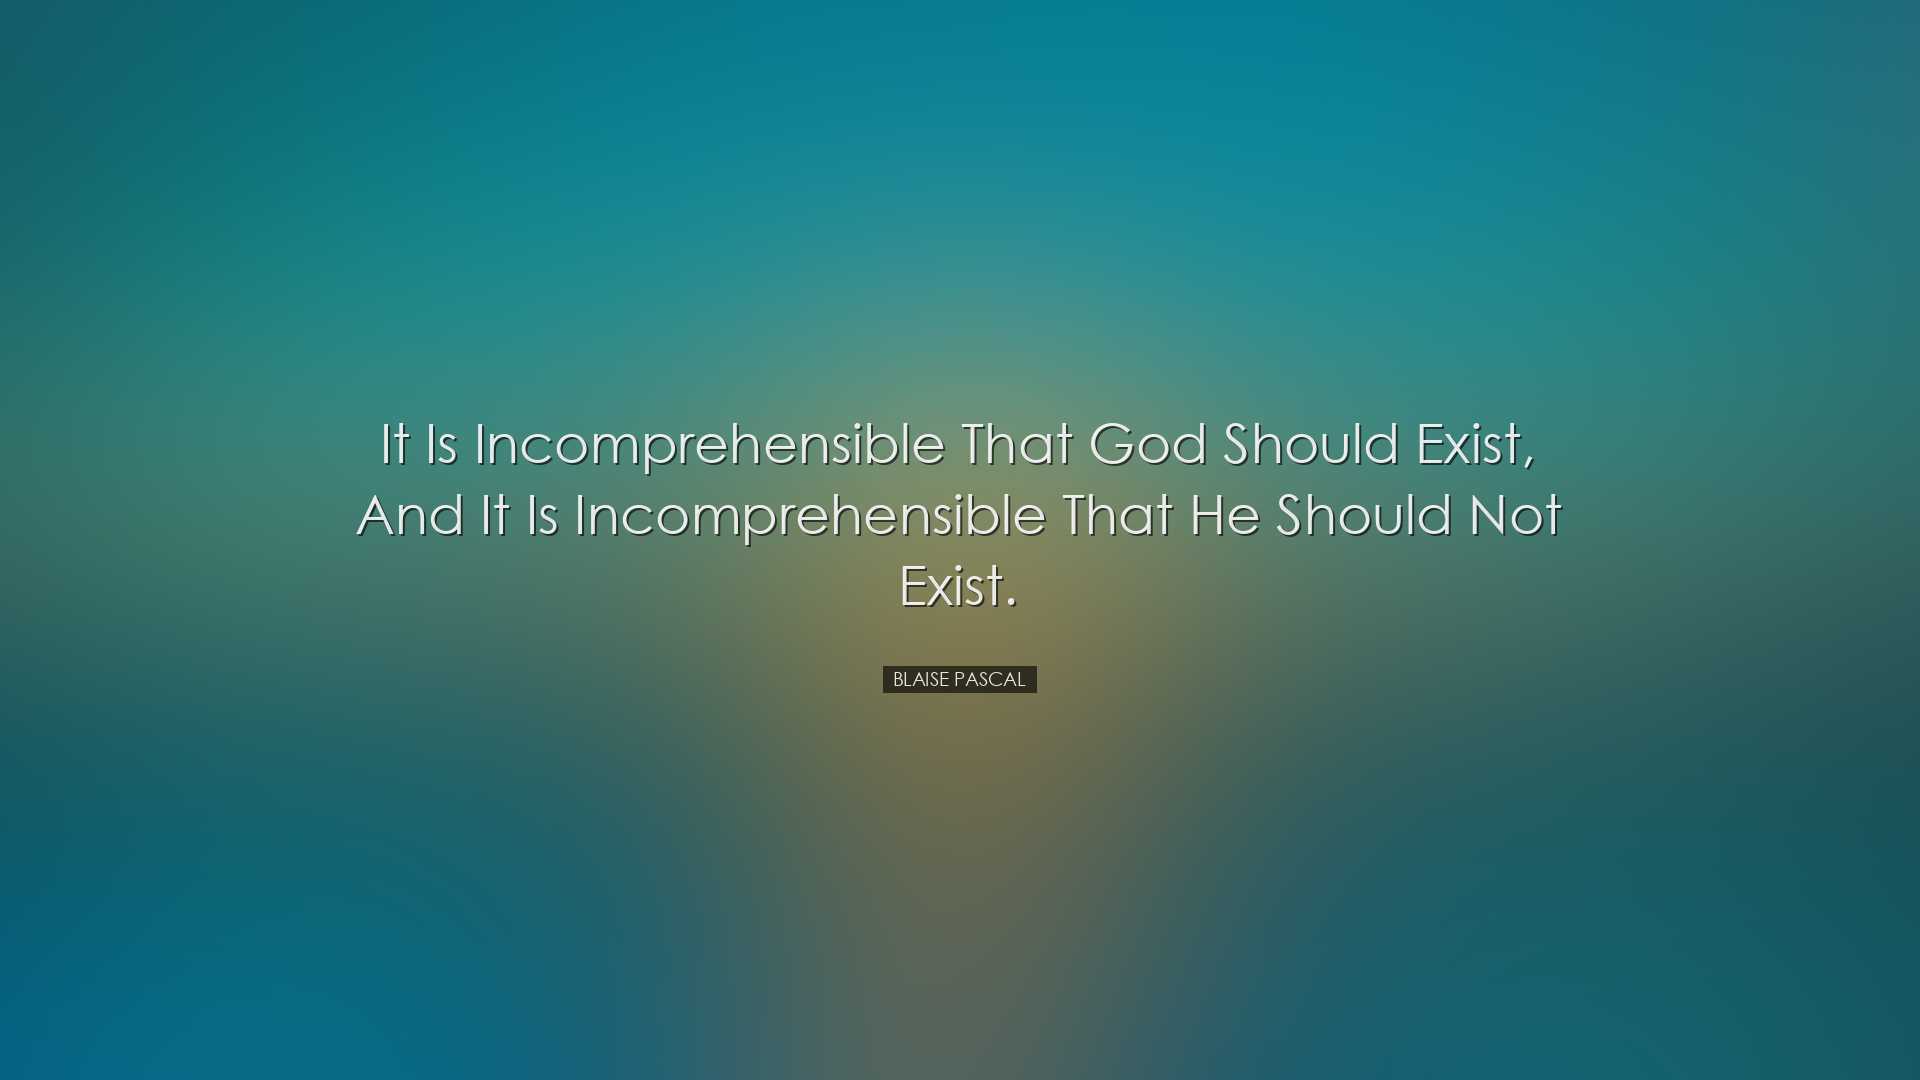 It is incomprehensible that God should exist, and it is incomprehe